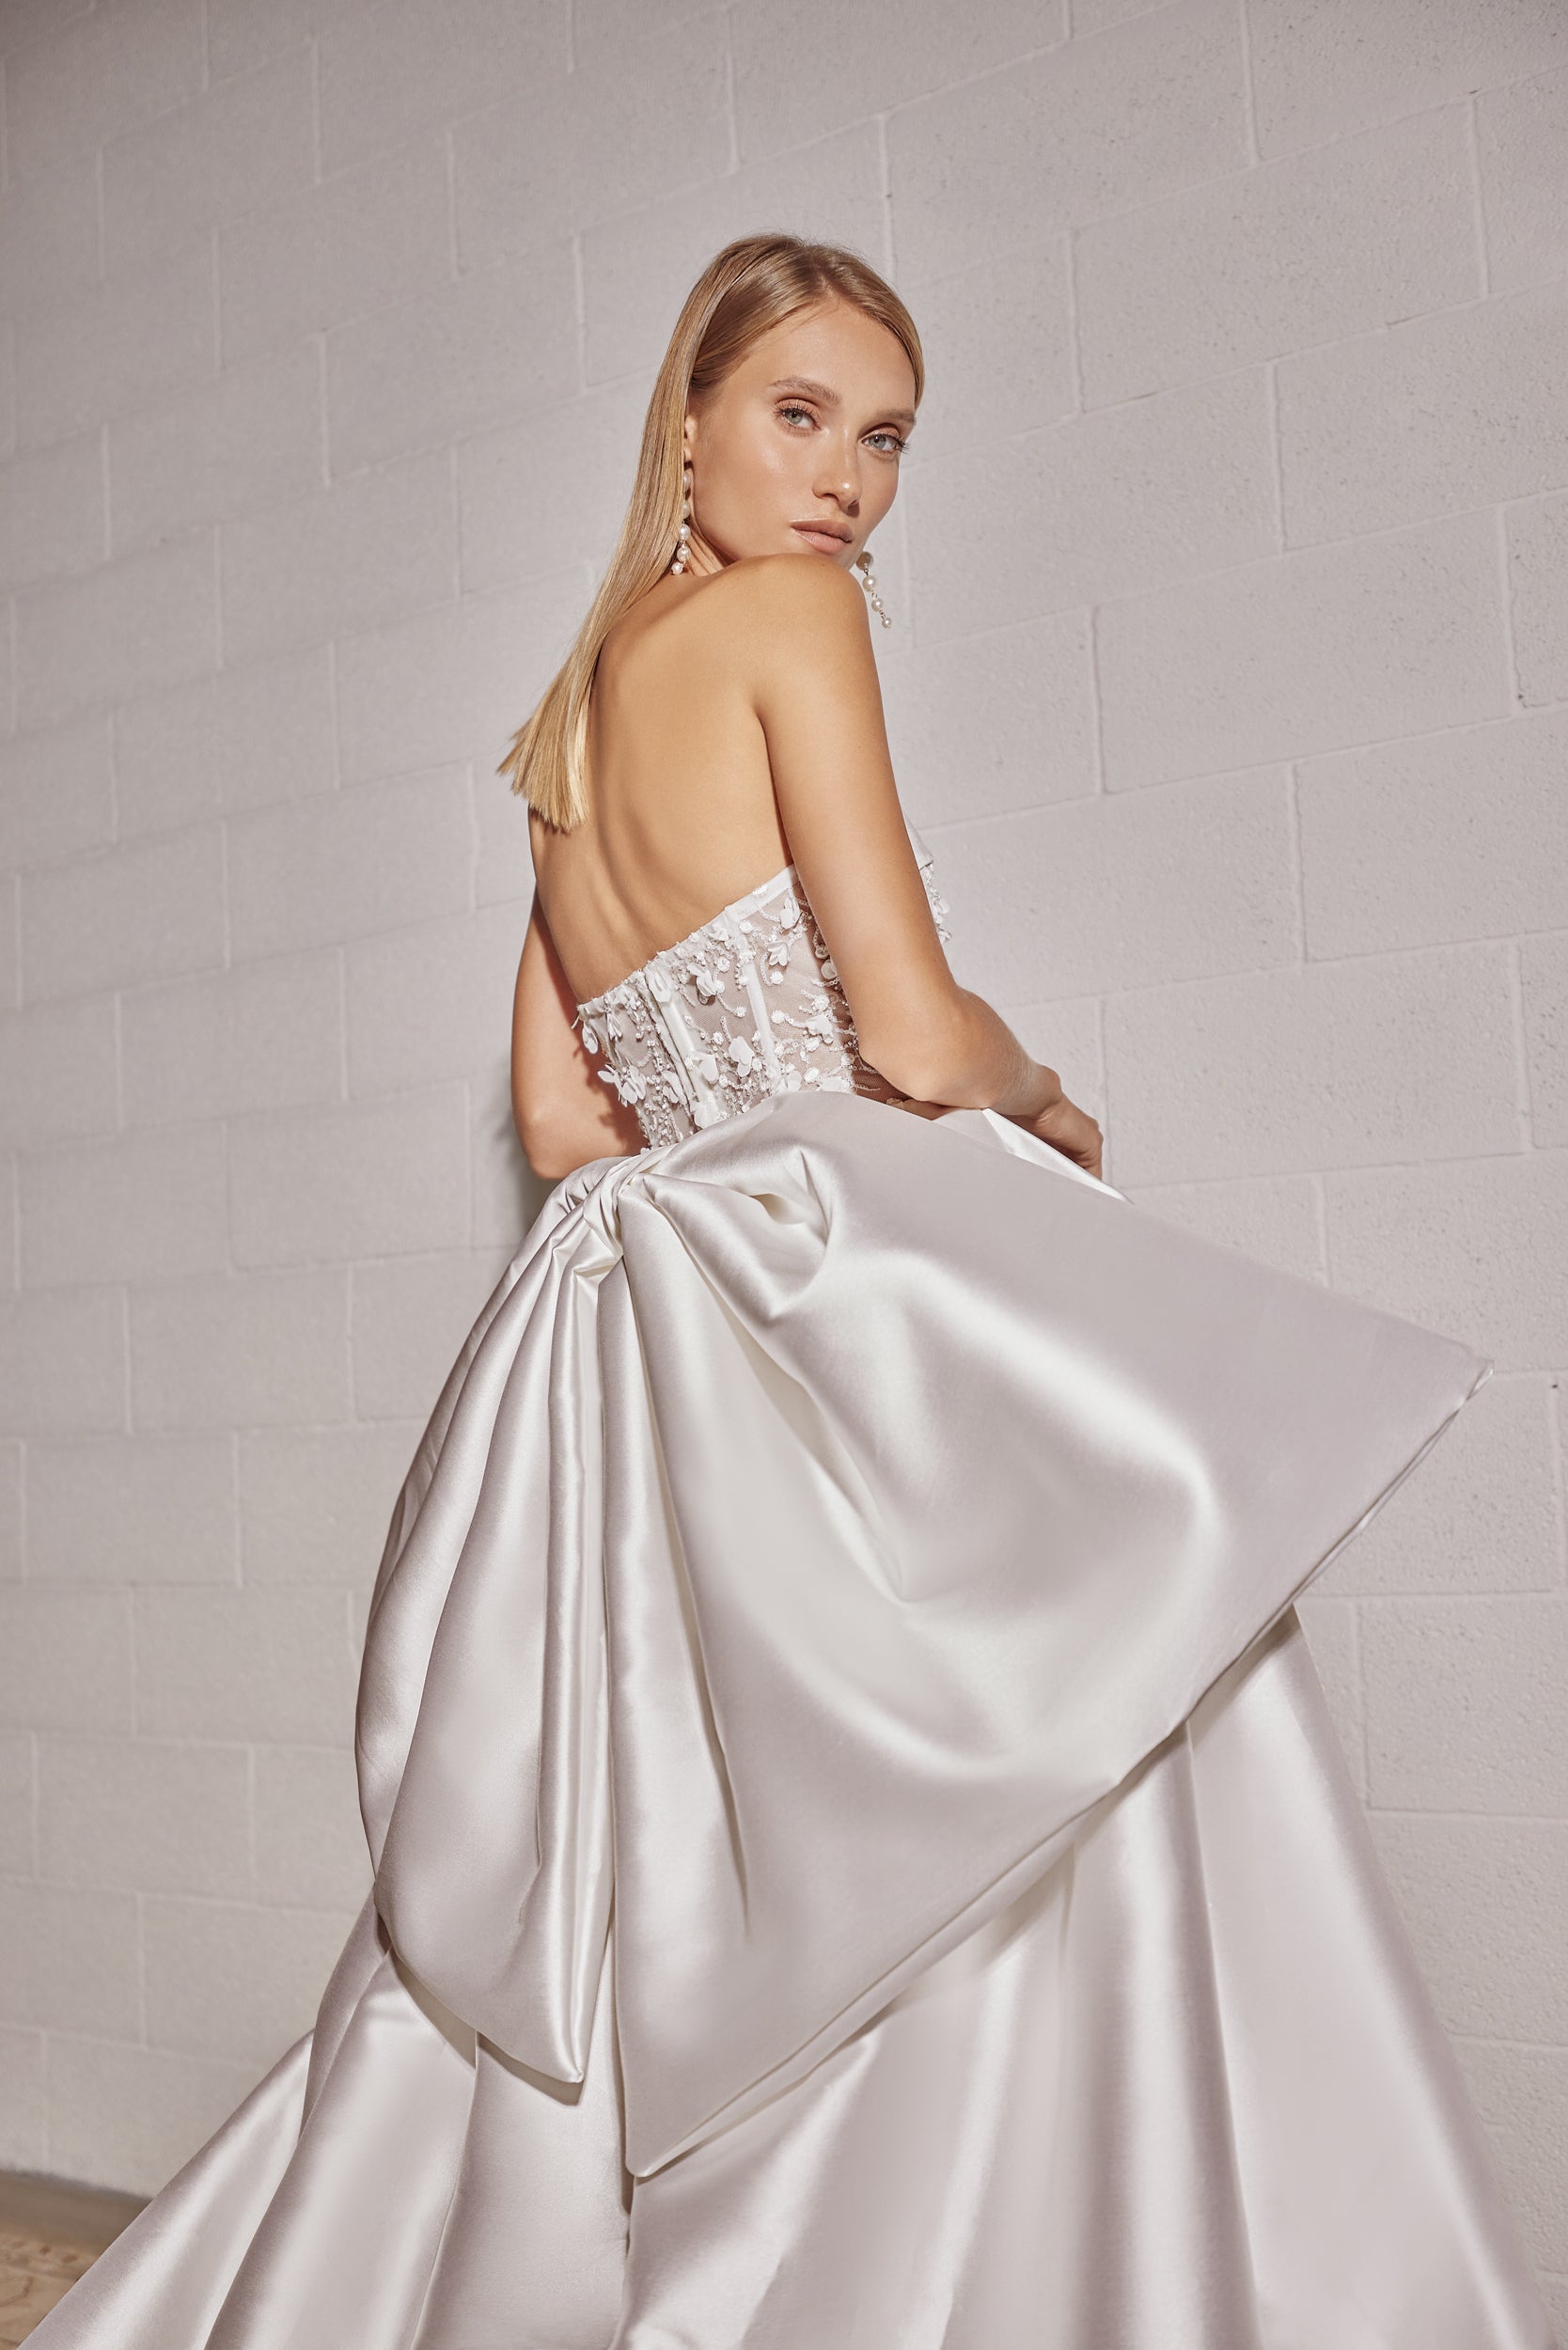 Bow-Adorned Floral Fit-and-Flare Gown With Detachable Overskirt by Tal Kedem Bridal Couture - Image 2